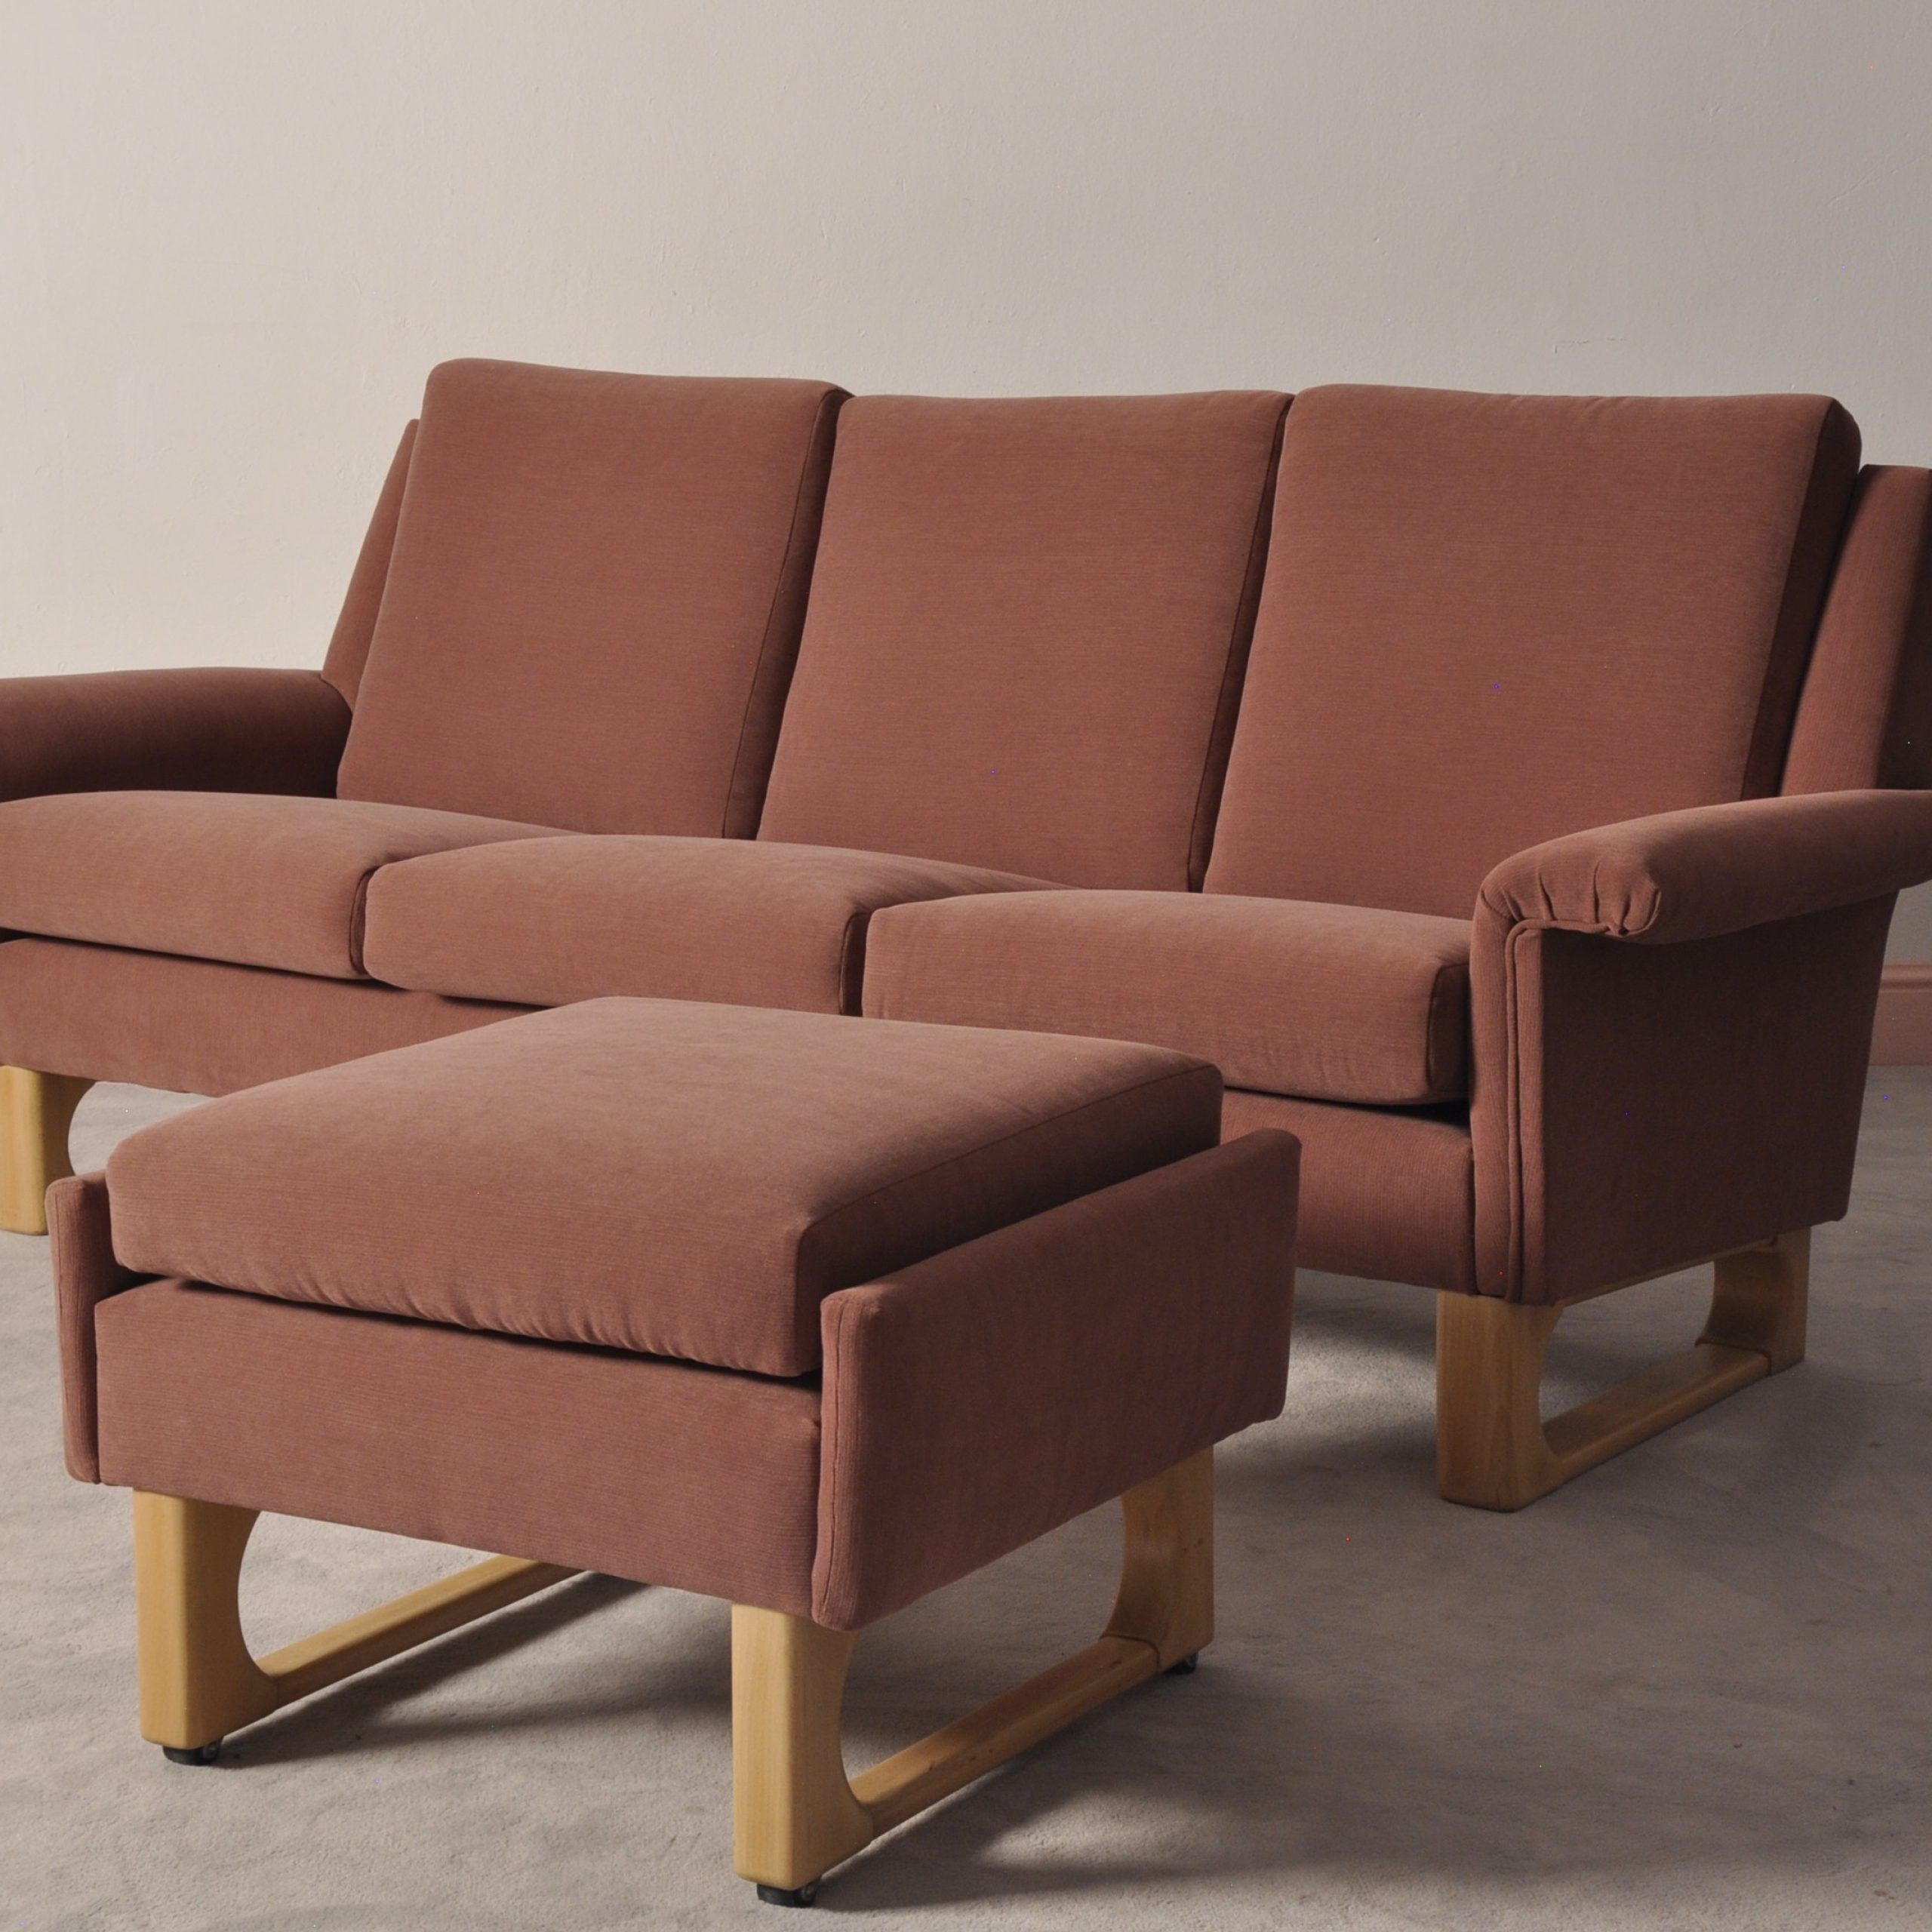 Scandinavian Mid Century 3 Seater Sofa & Ottoman – 1970s – Design Market Intended For Mid Century 3 Seat Couches (Gallery 11 of 20)